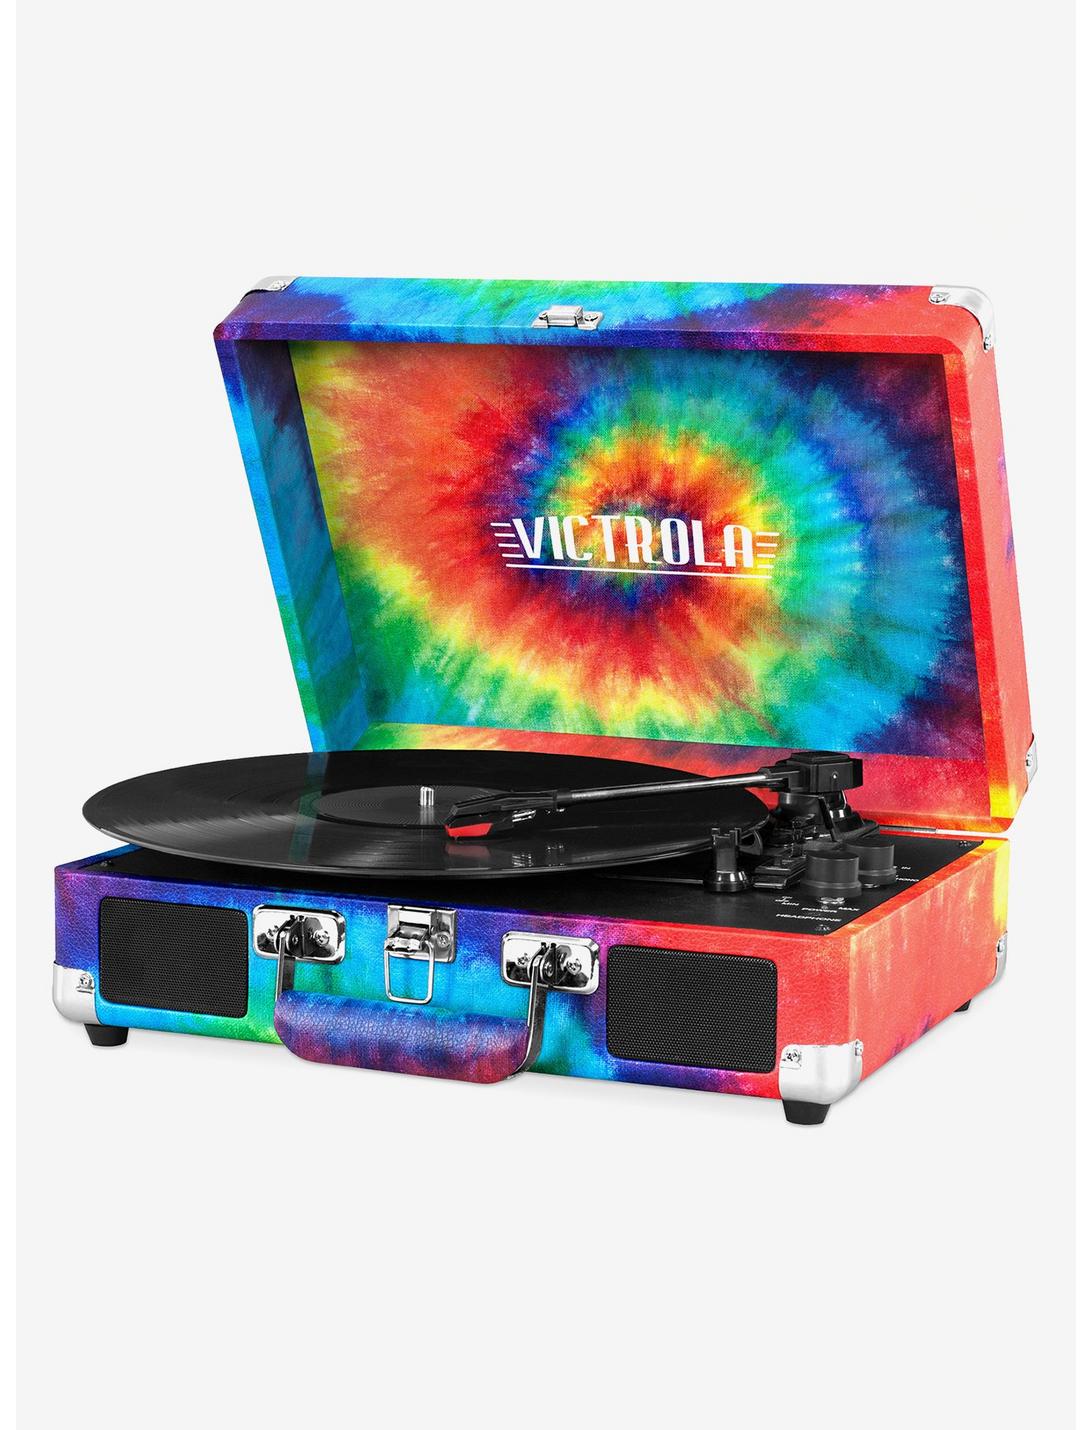 Victrola Bluetooth Suitcase Record Player With 3-Speed Turntable - Tie Dye, , hi-res